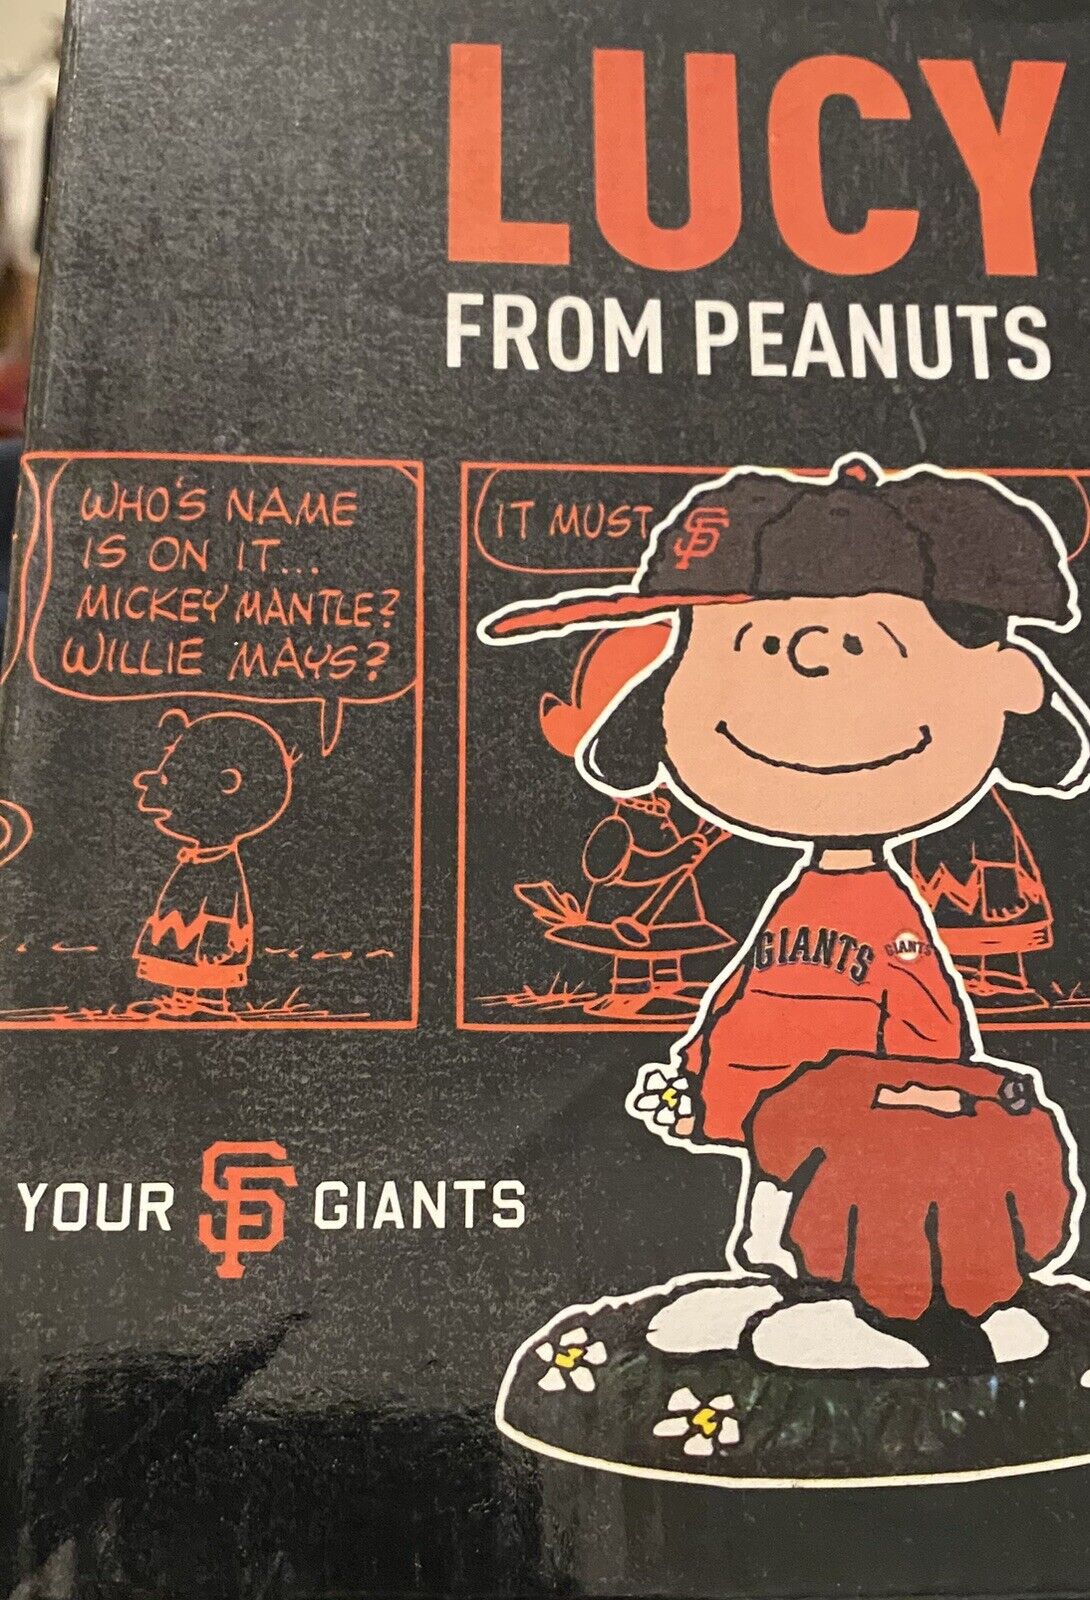 SF Giants 2010 Lucy from Peanuts Bobblehead